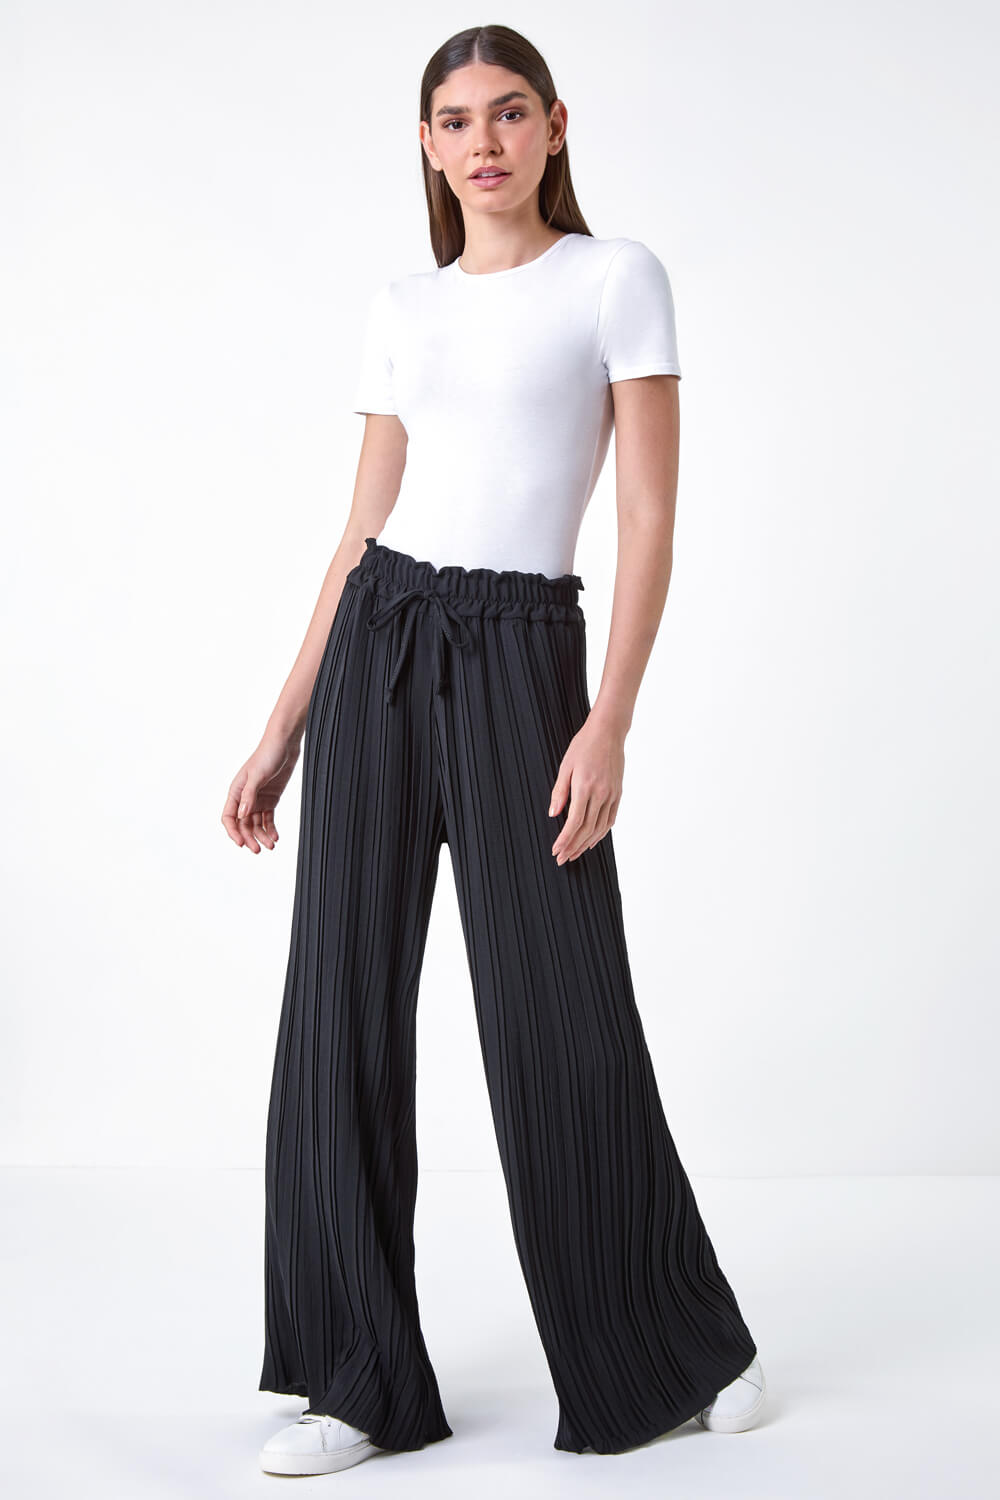 Black Pleated Tie Waist Stretch Trousers, Image 2 of 5